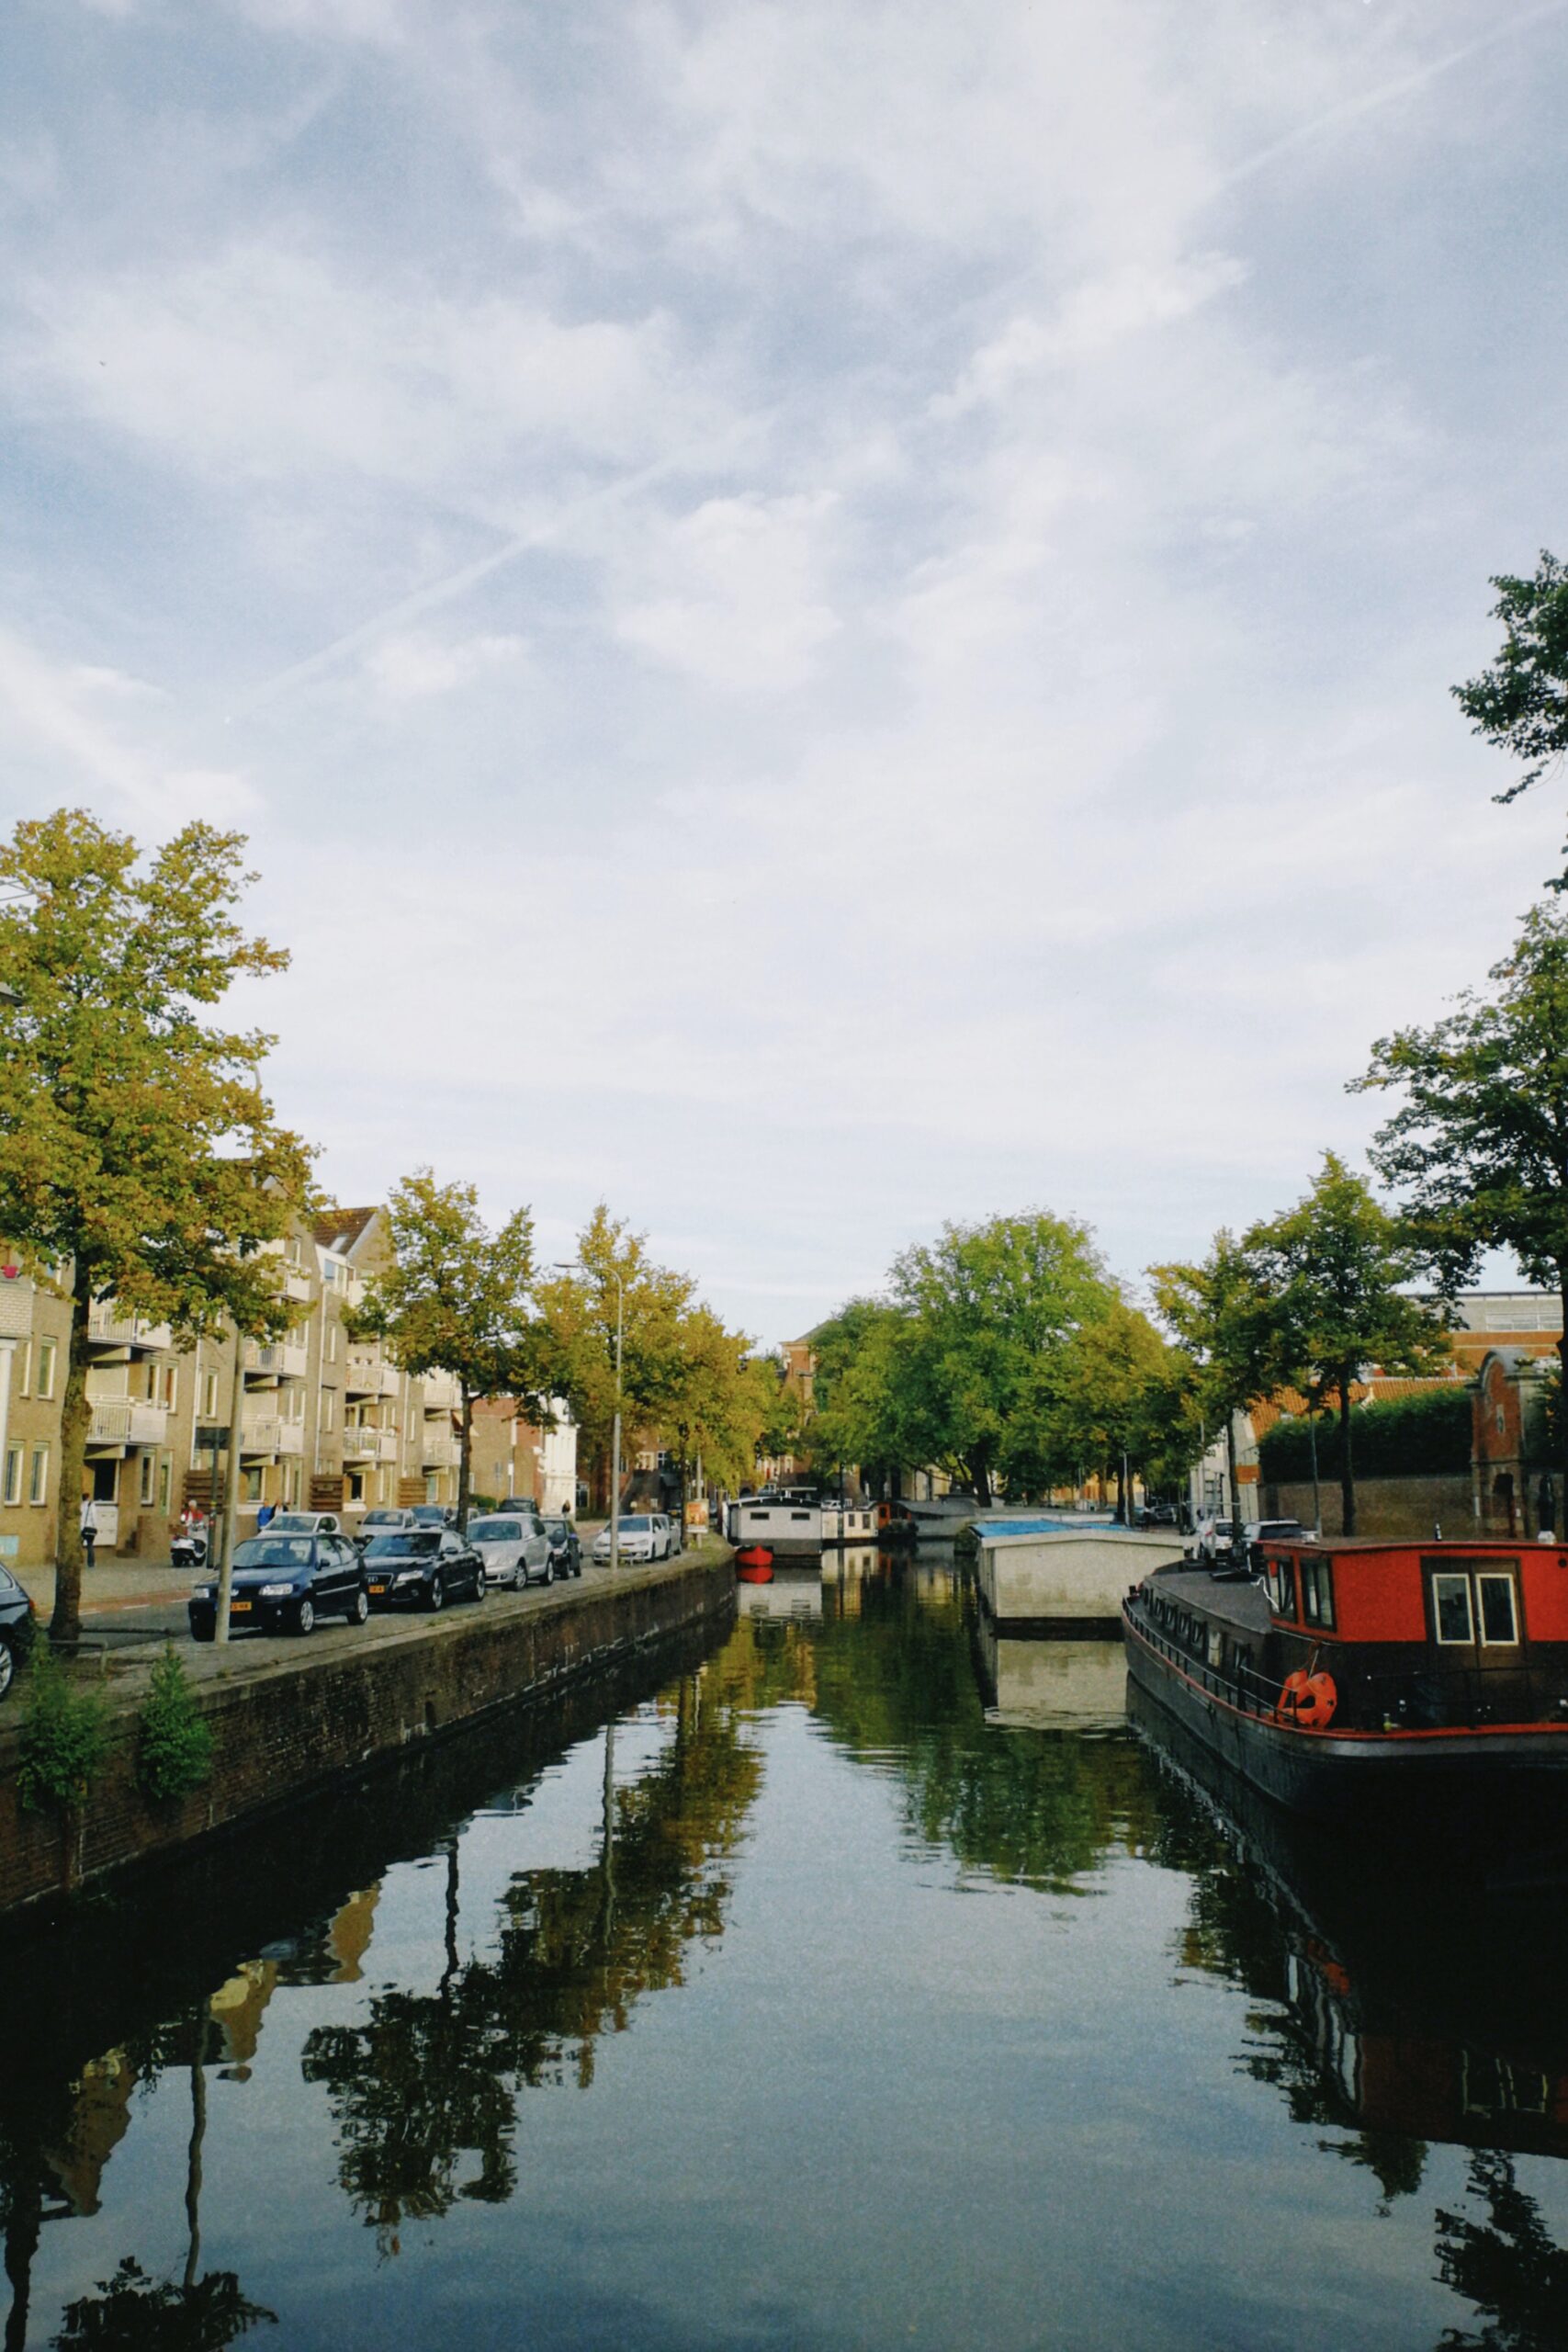 dutch barges moored along an urban canal